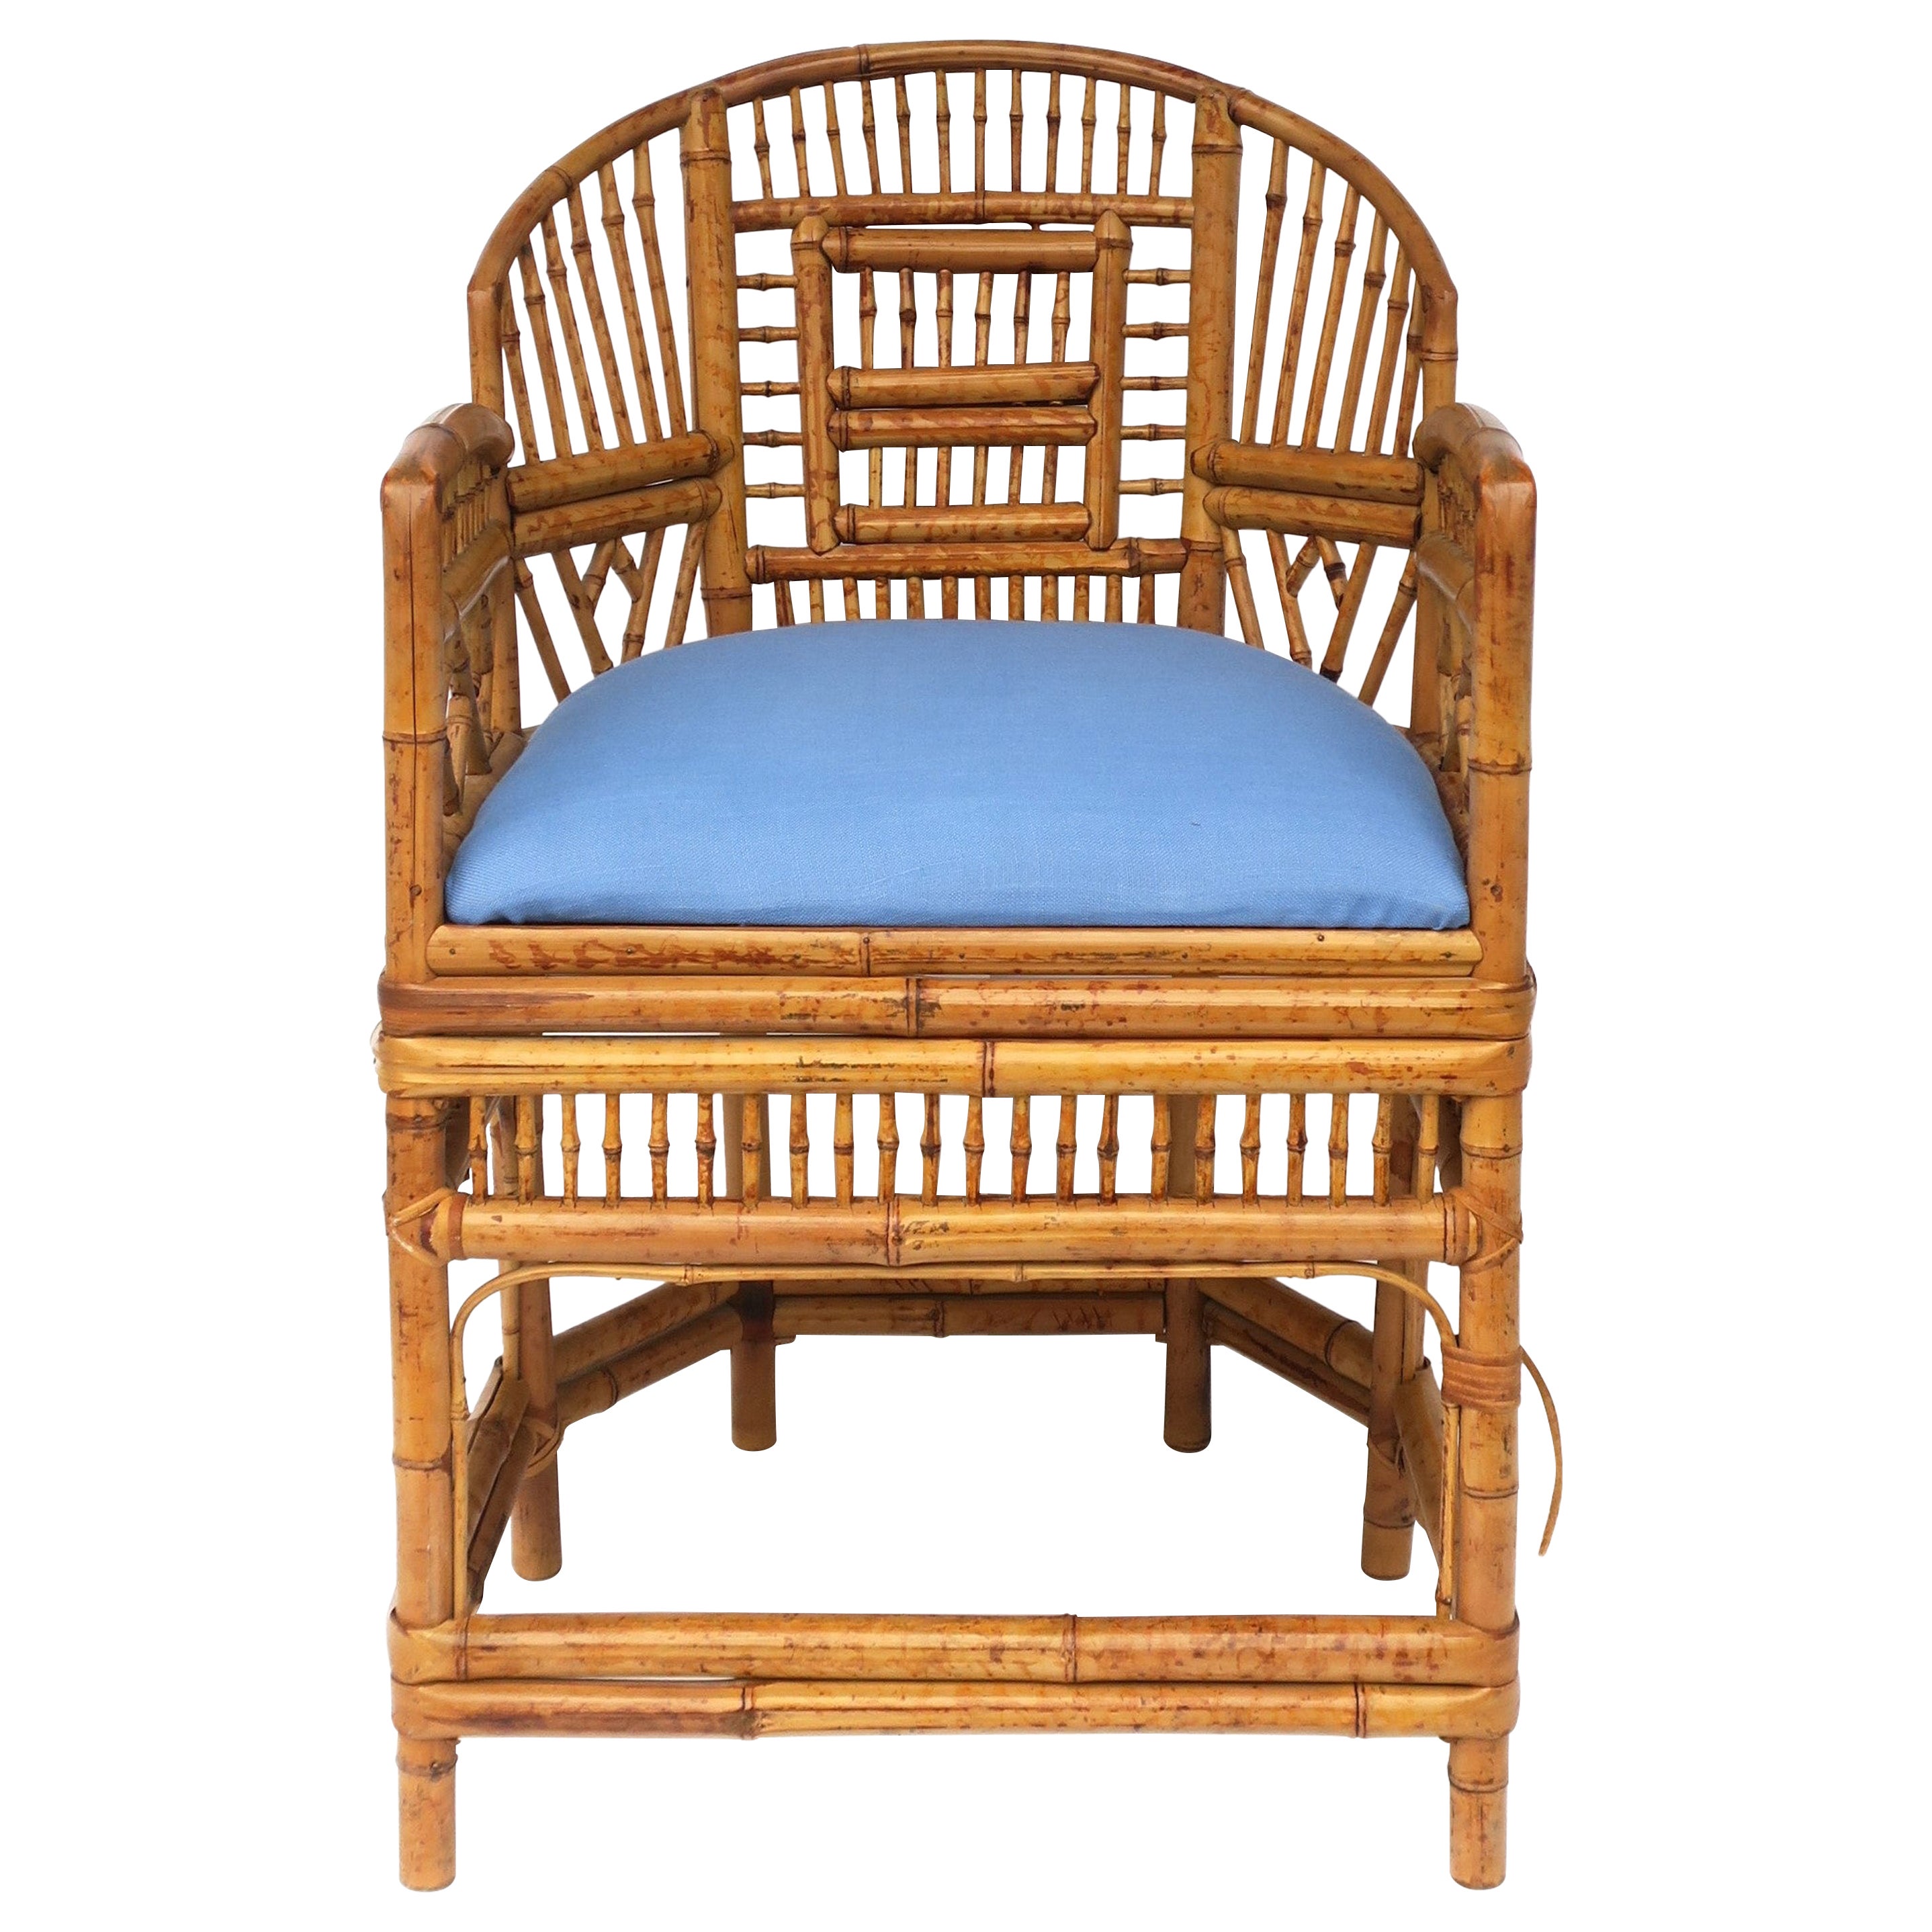 Wicker Bamboo Chair with Blue Upholstered Seat in the Chinoiserie Style